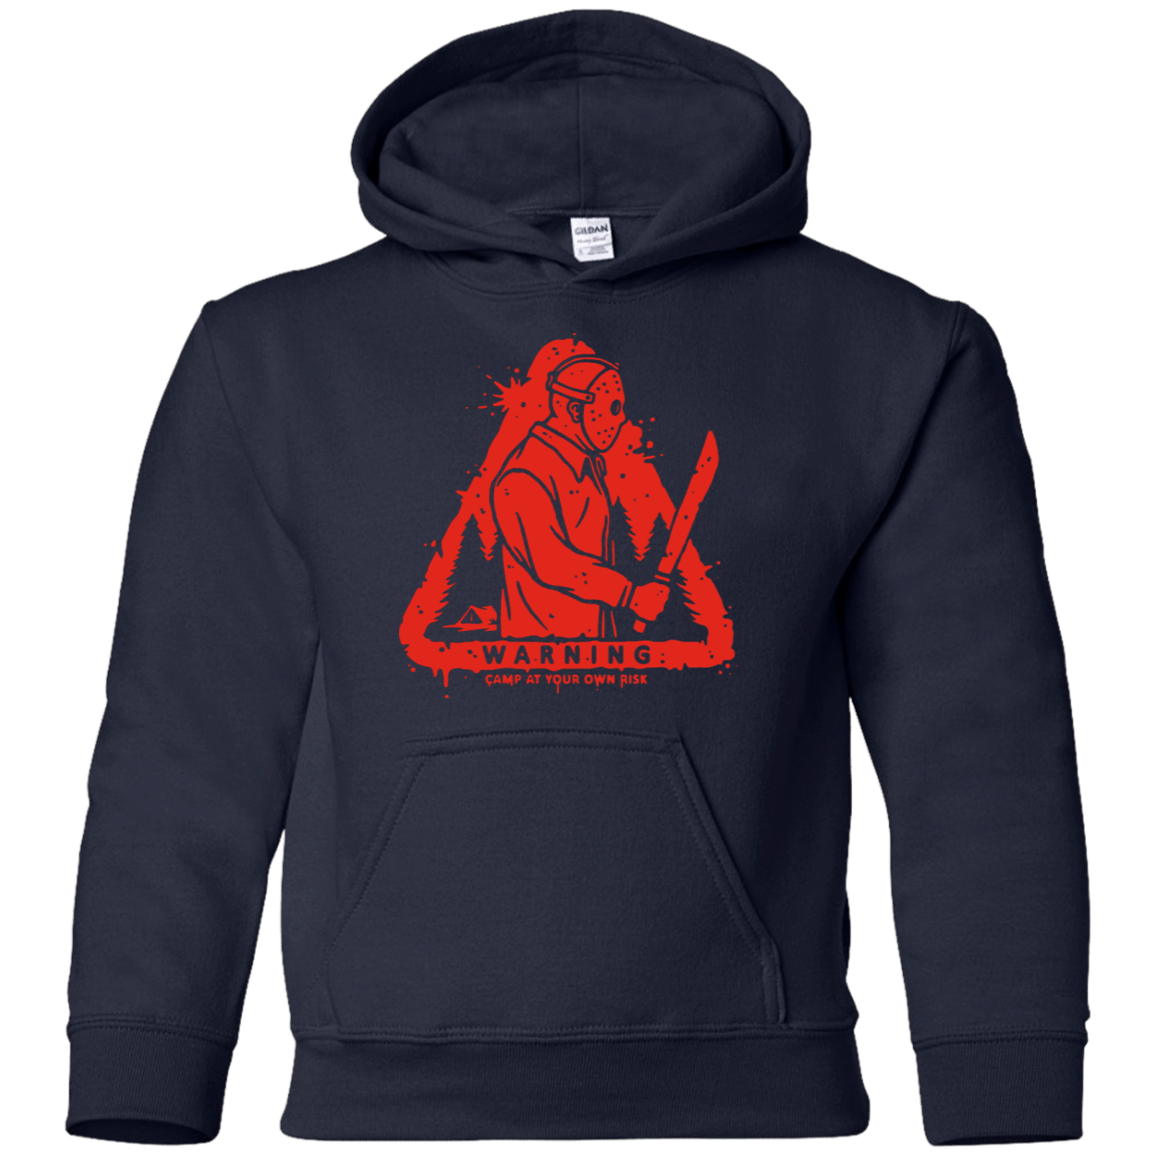 Sweatshirts Navy / YS Camp at Your Own Risk Youth Hoodie